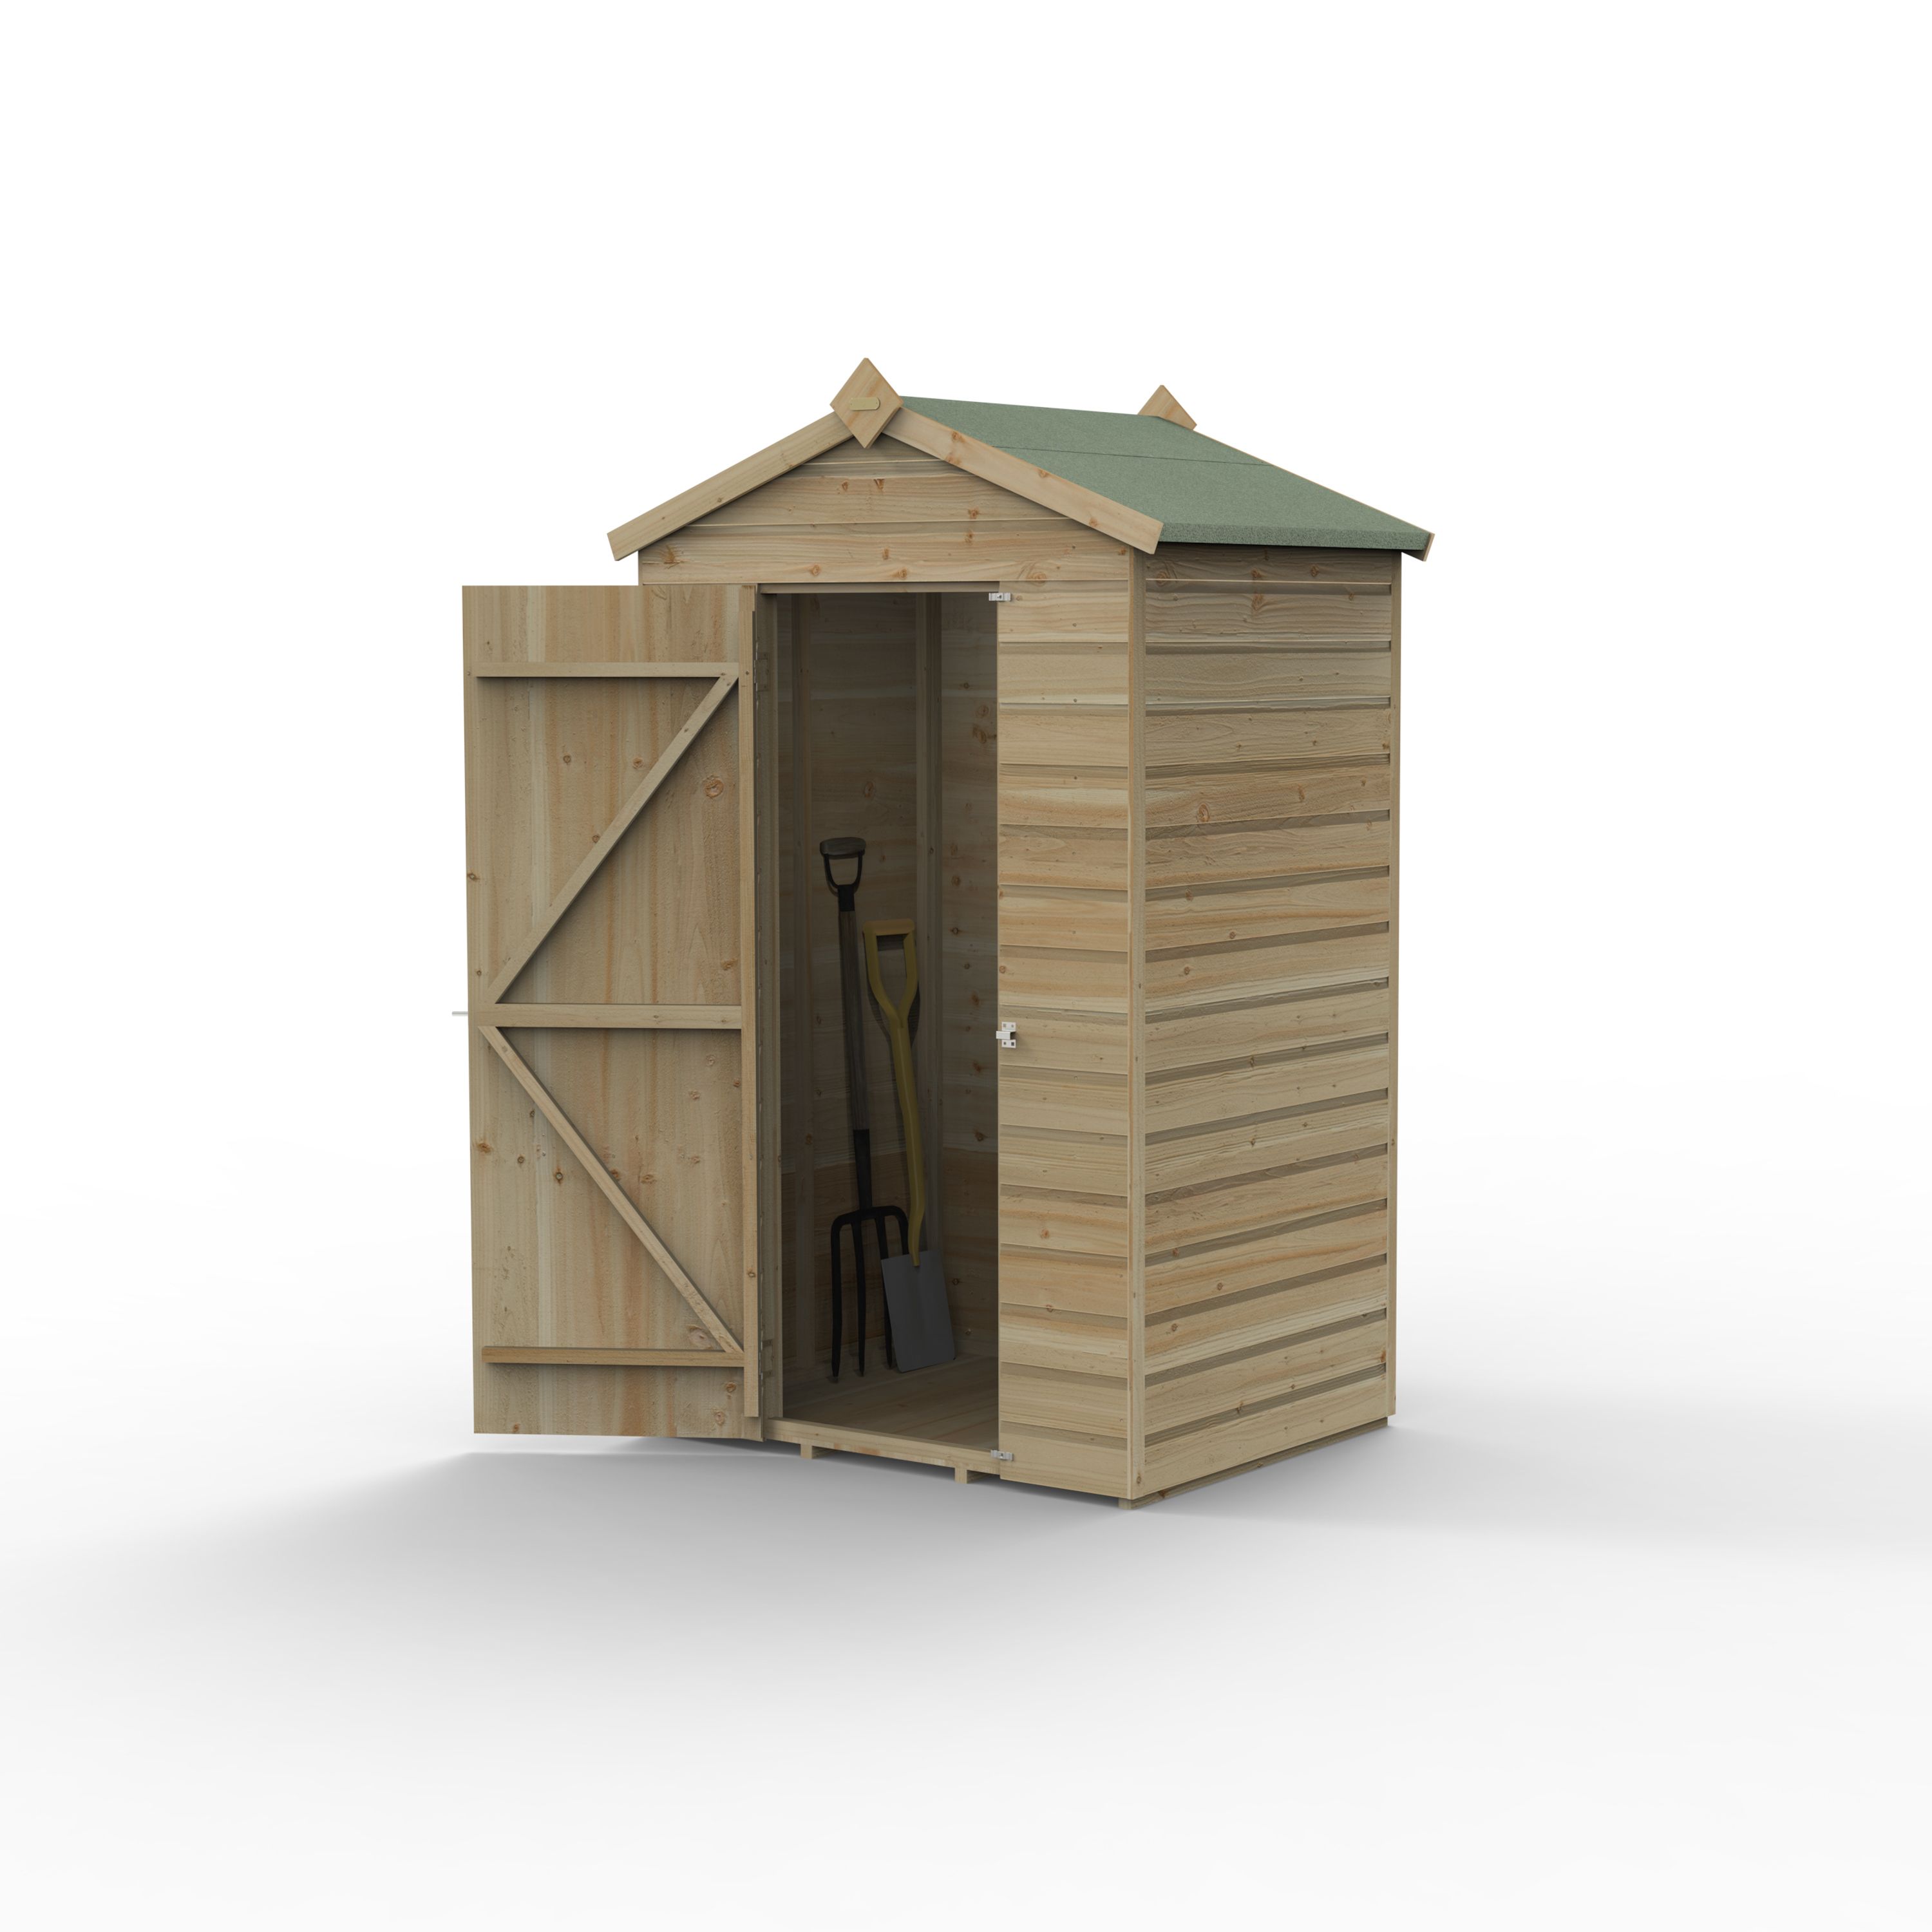 Forest Garden Beckwood 4x3 ft Apex Natural timber Wooden Shed with floor